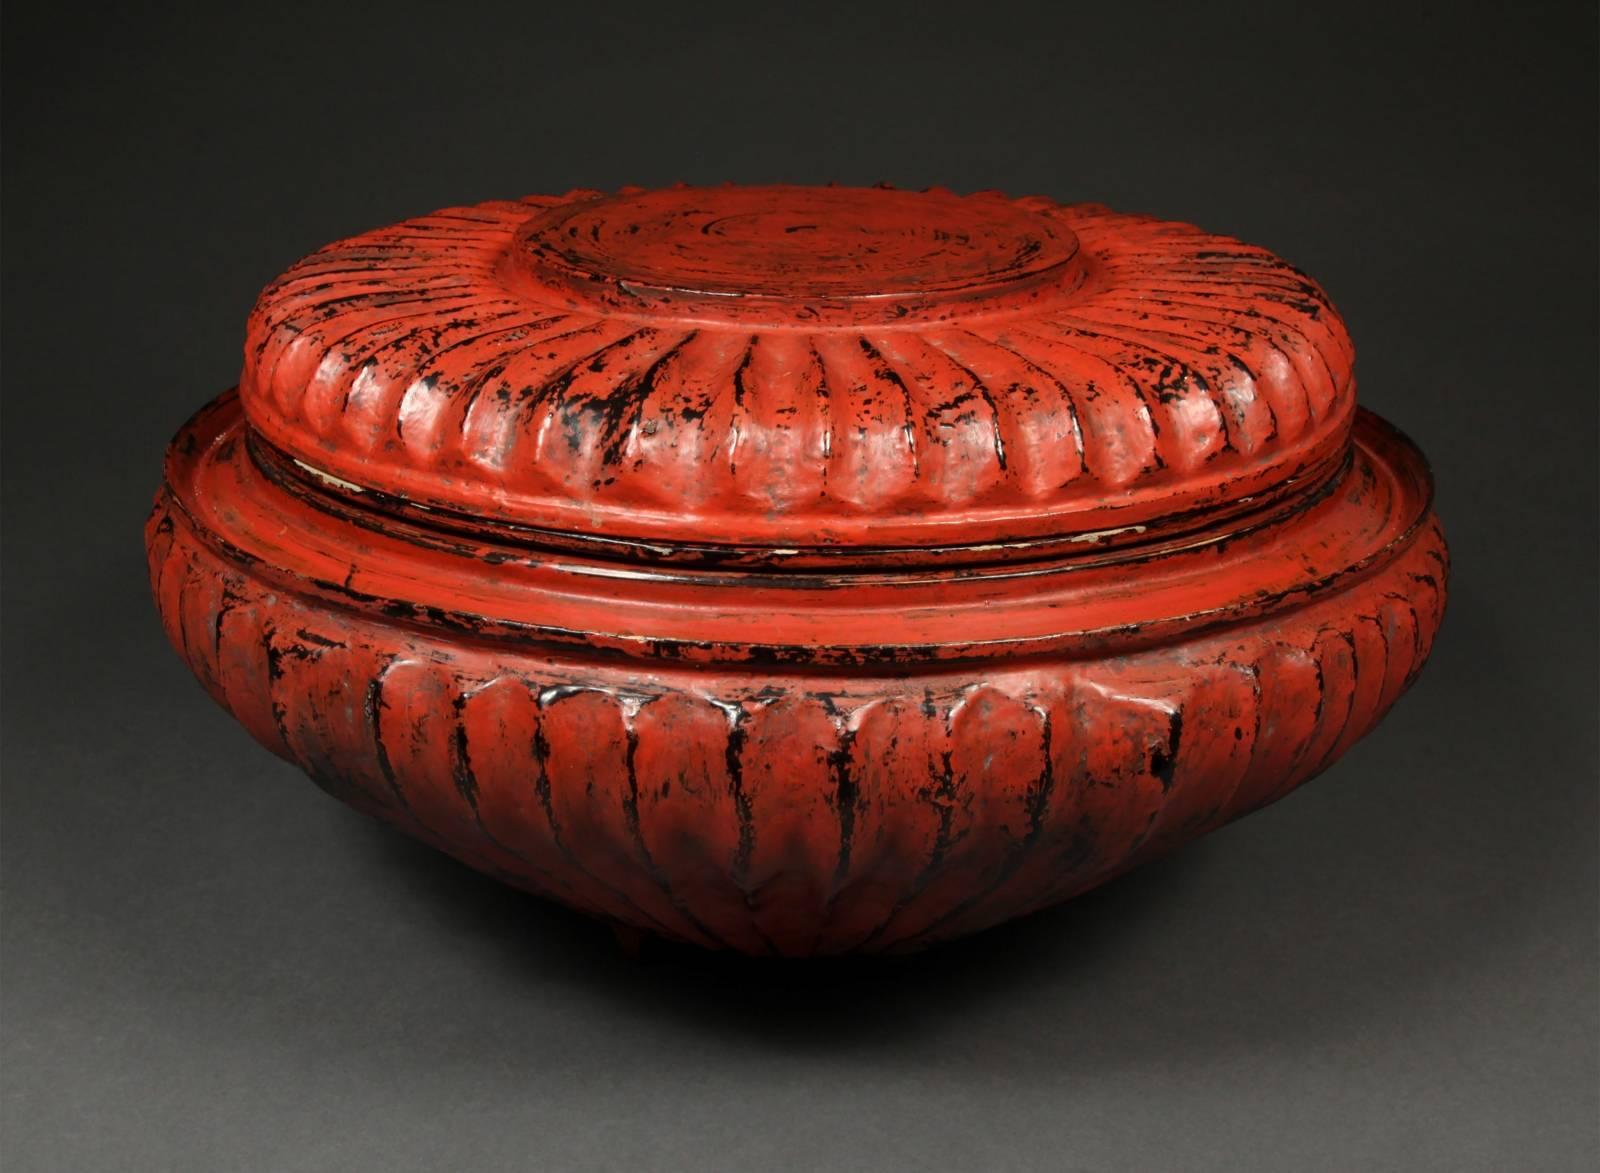 Offered by Vicki Shiba
Late 19th-early 20th century lacquer offering vessel, Hsun-ok Burma

An unusual ribbed Hsun-ok, food offering box. Such containers were designed to carry meals for monks, high officials and wealthy individuals.
  